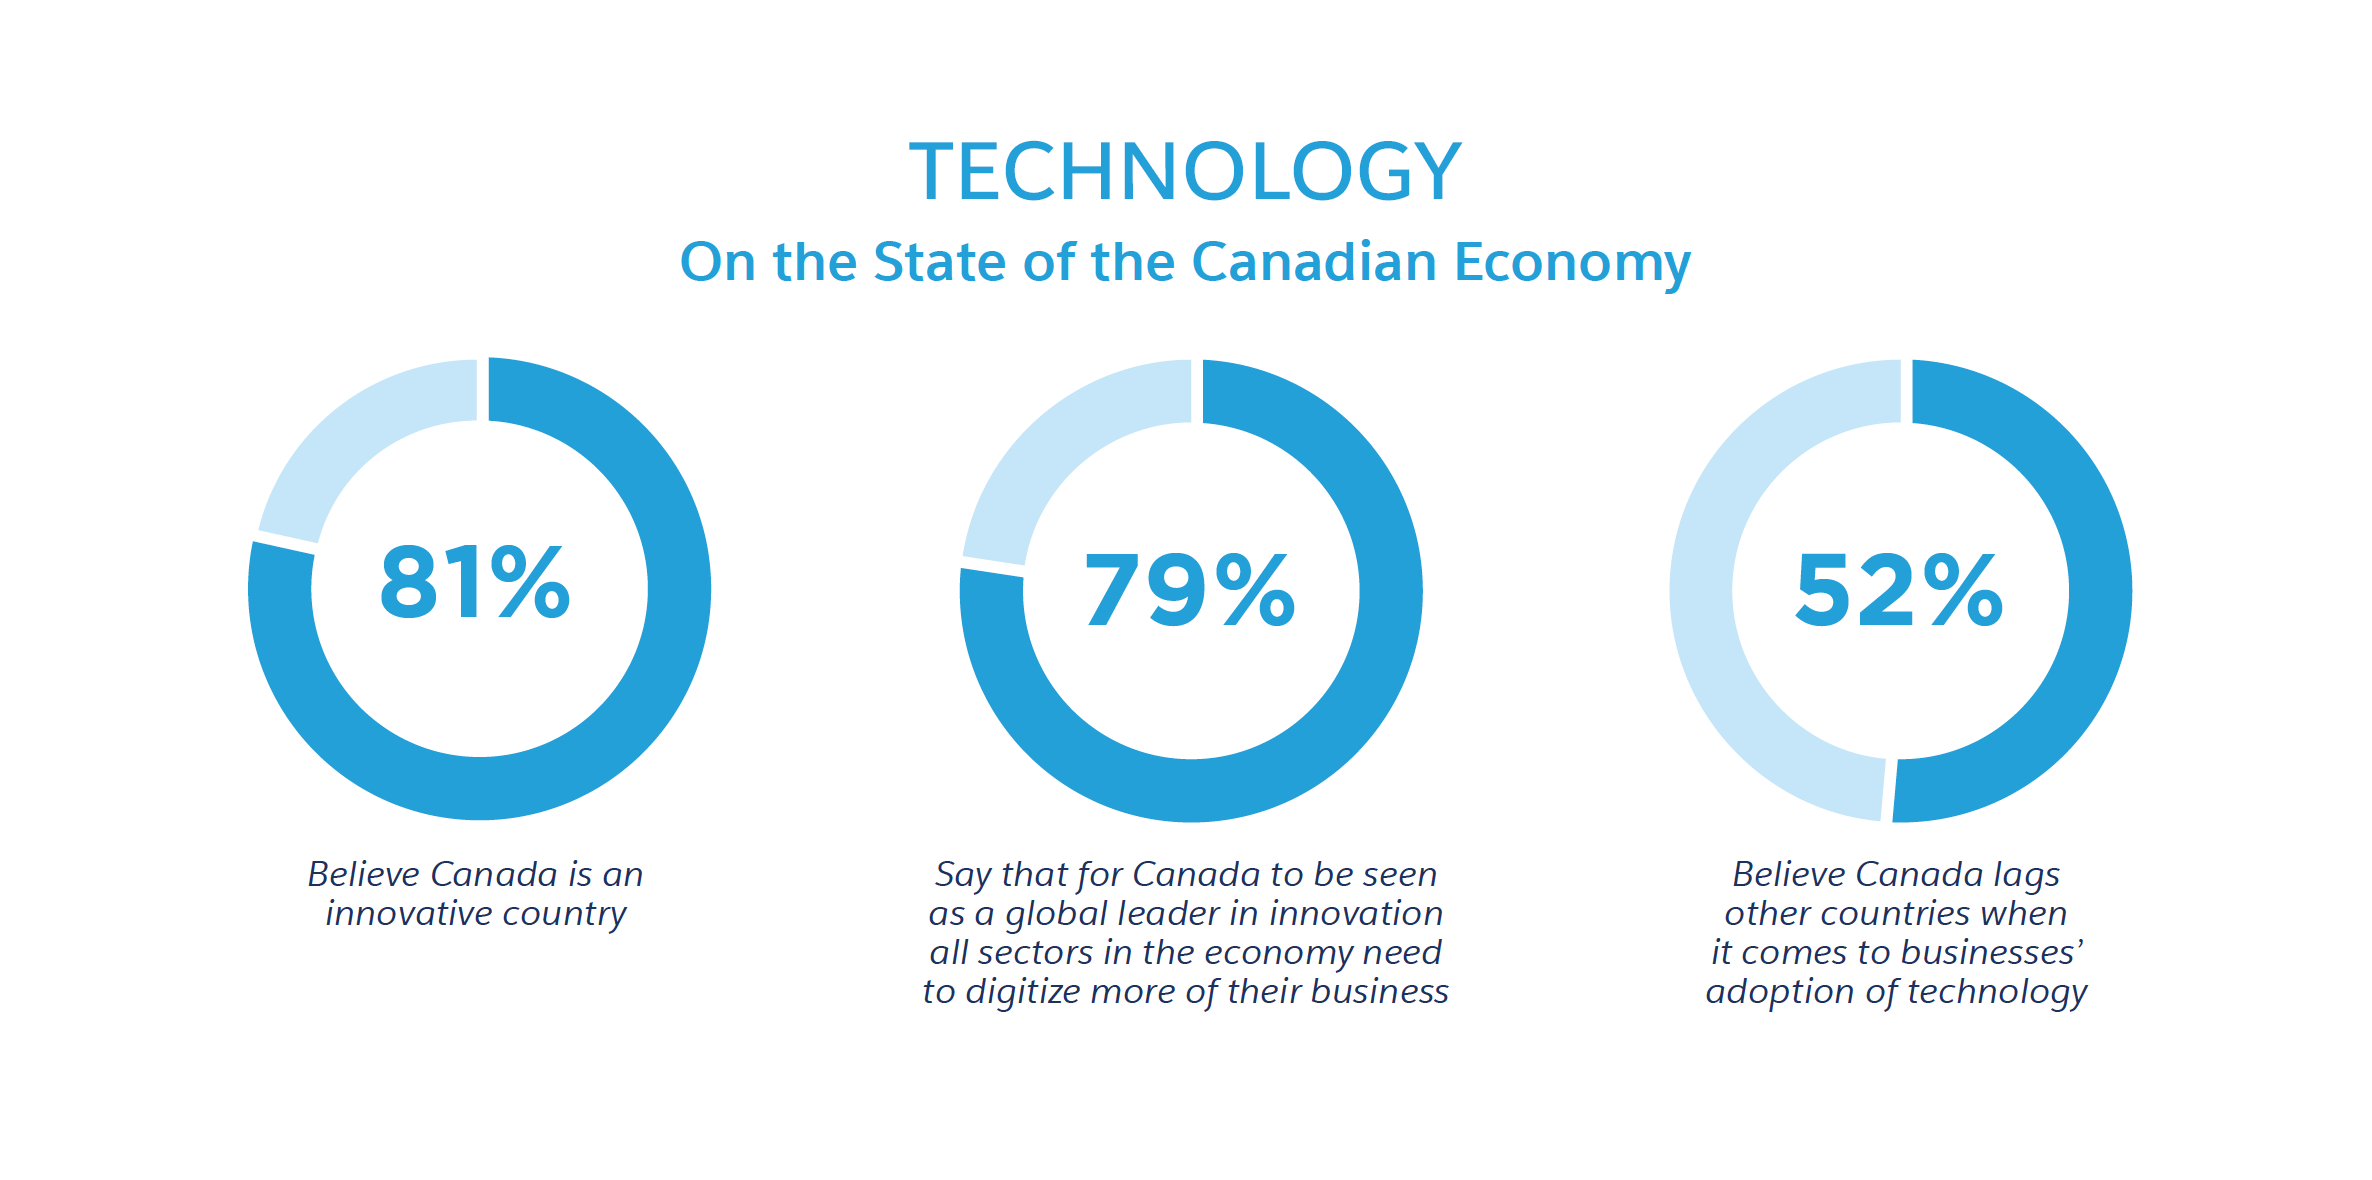 Salesforce Explores the Critical Role of Technology in Canadian